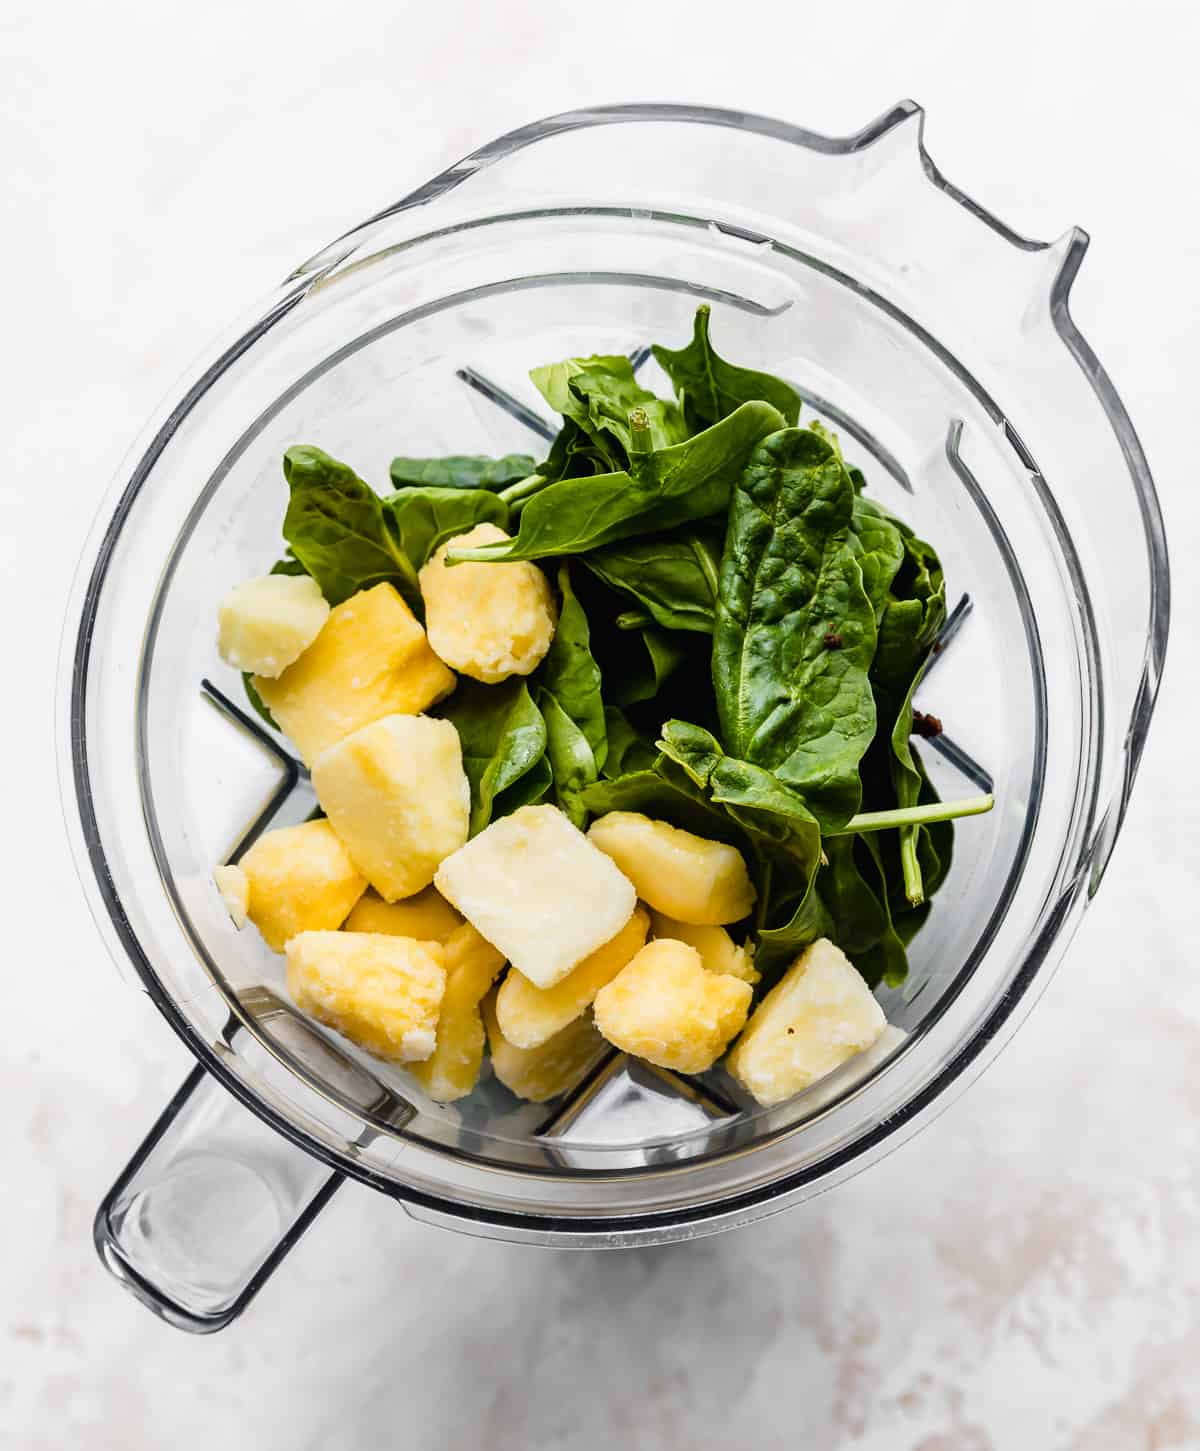 Overhead photo of a blender filled with fresh spinach leaves and frozen pineapple chunks.